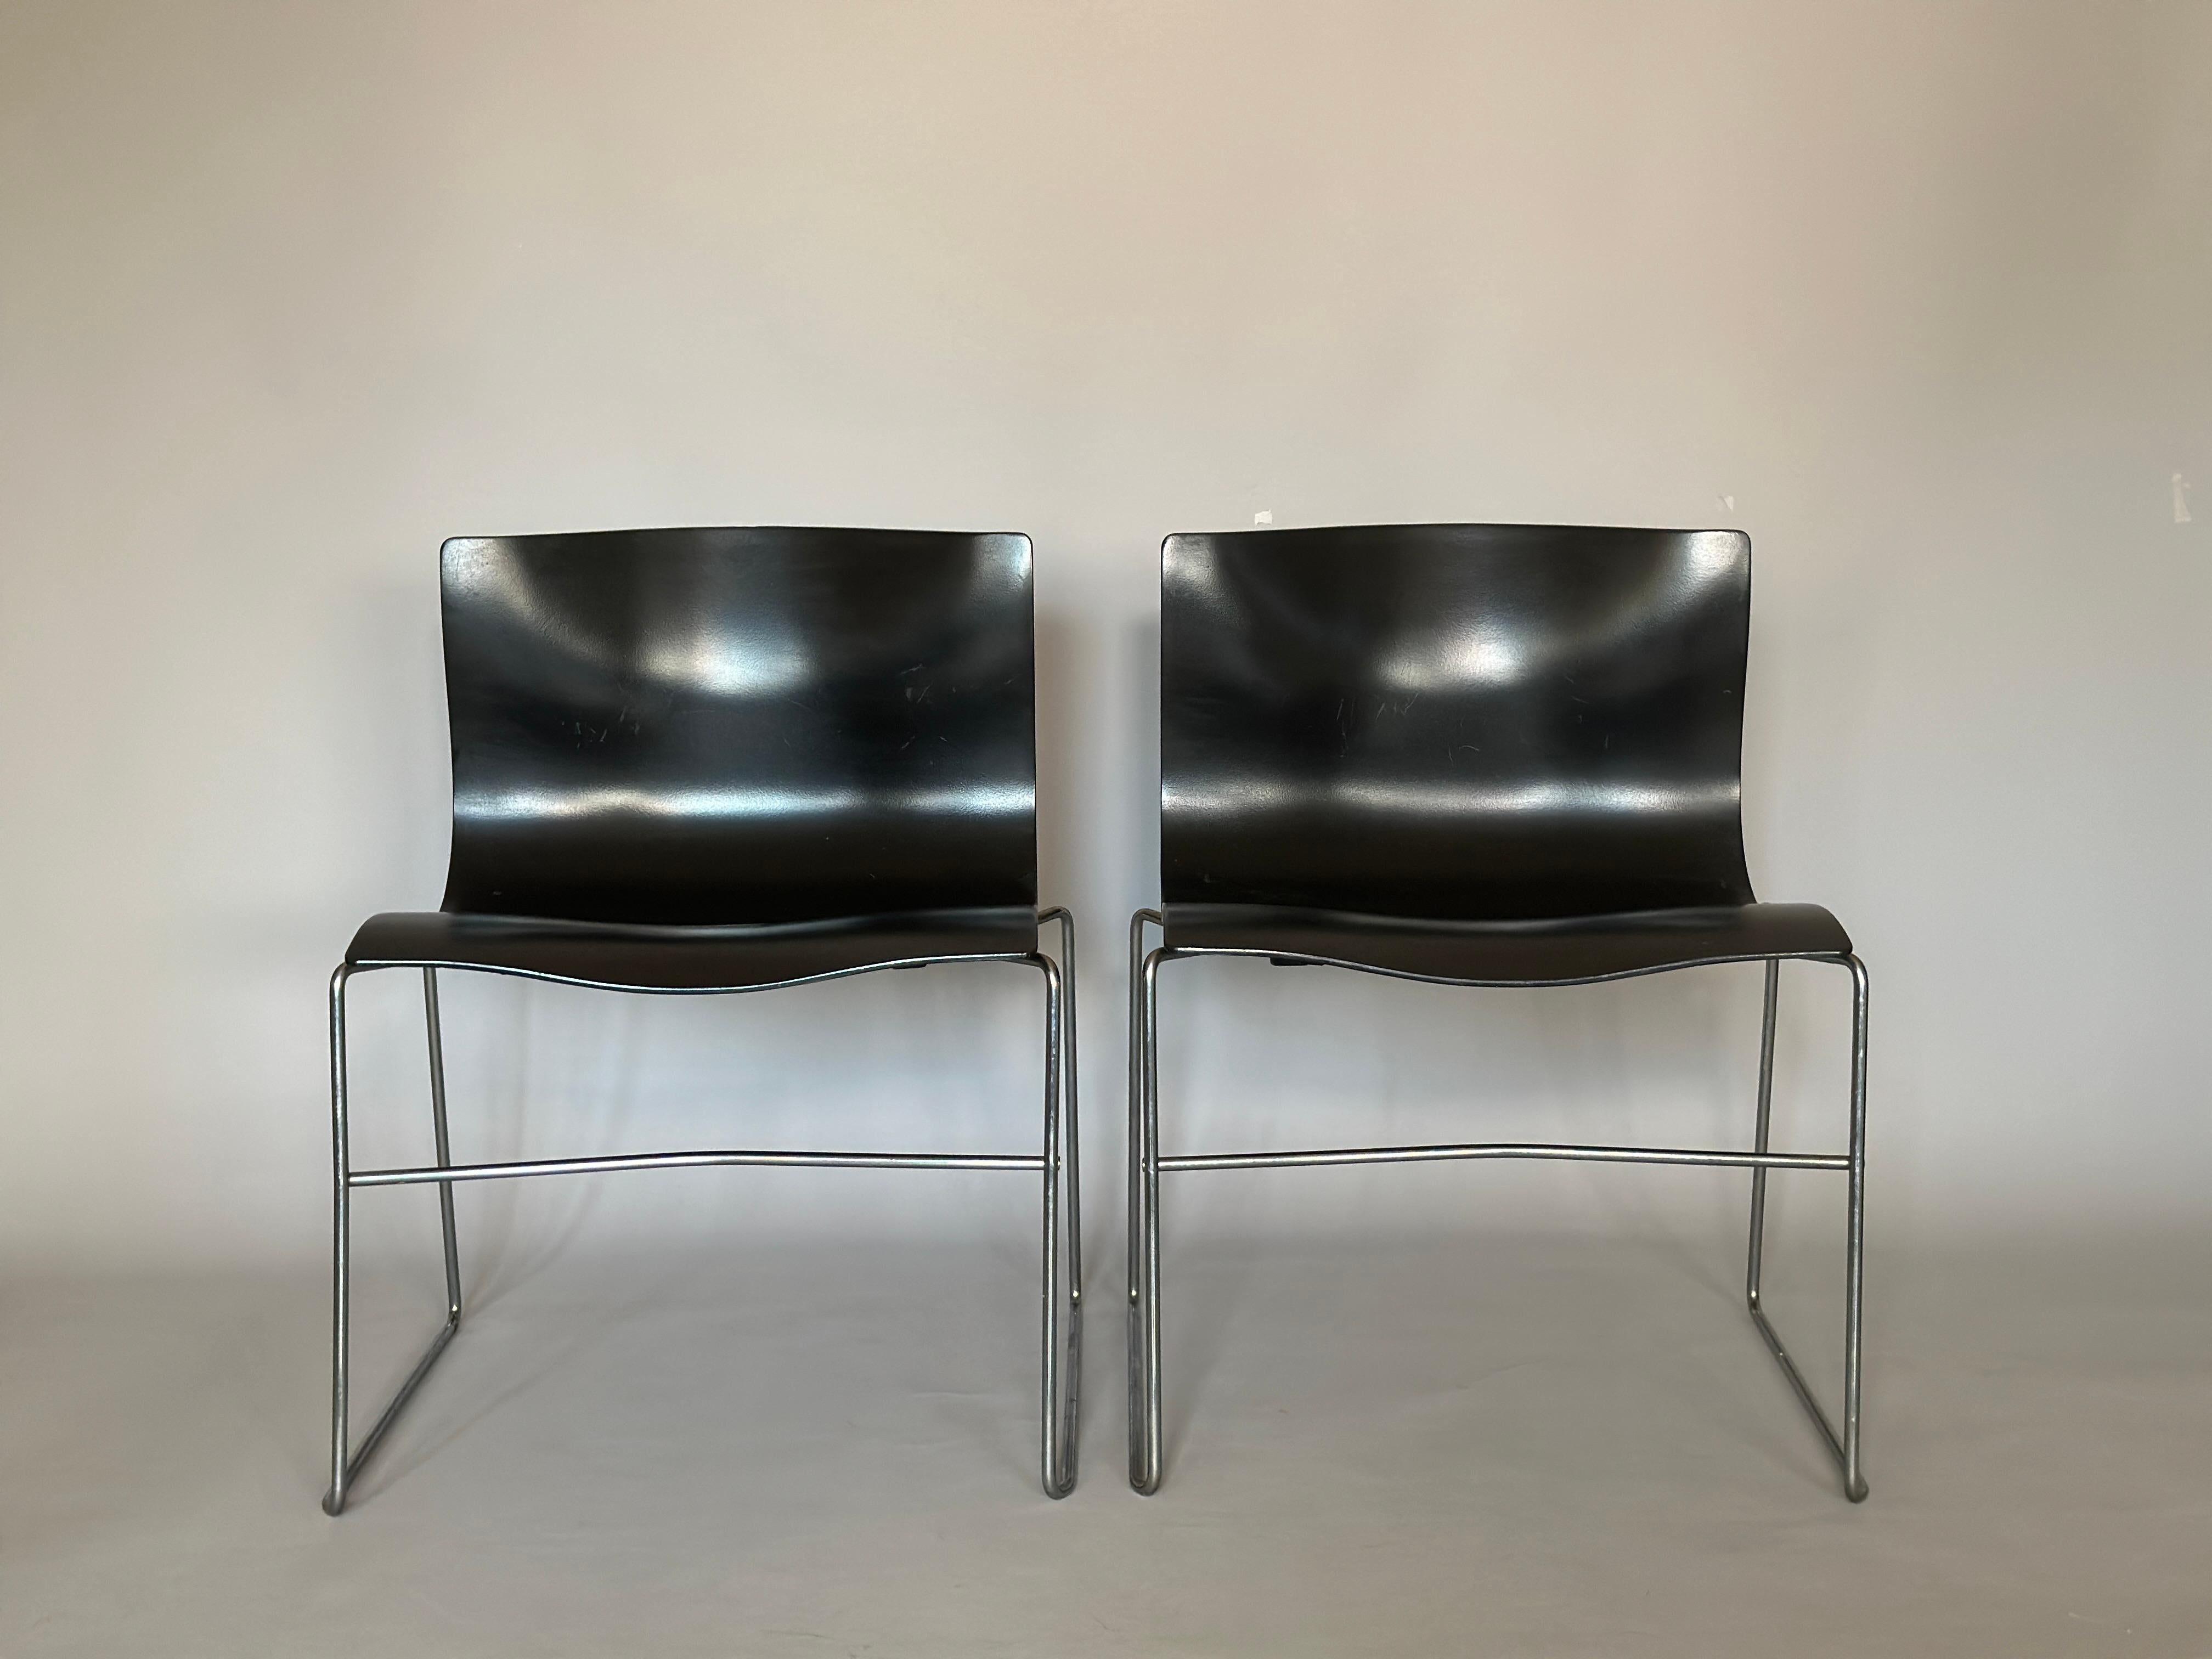 Knoll chair by Massimo Vagnelli